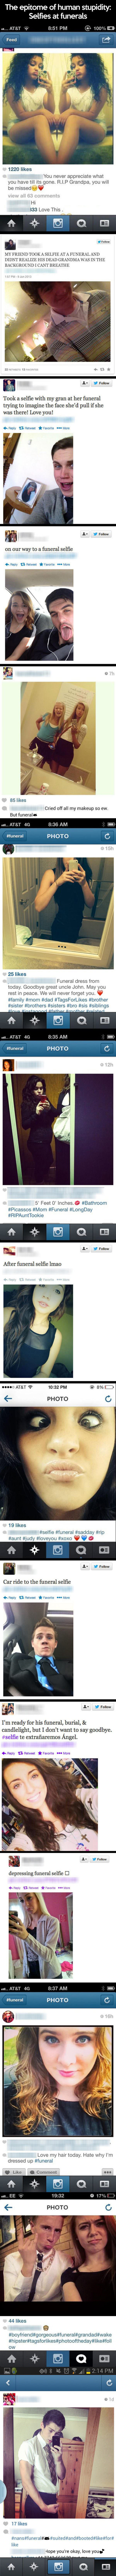 Funeral Selfies funny picture